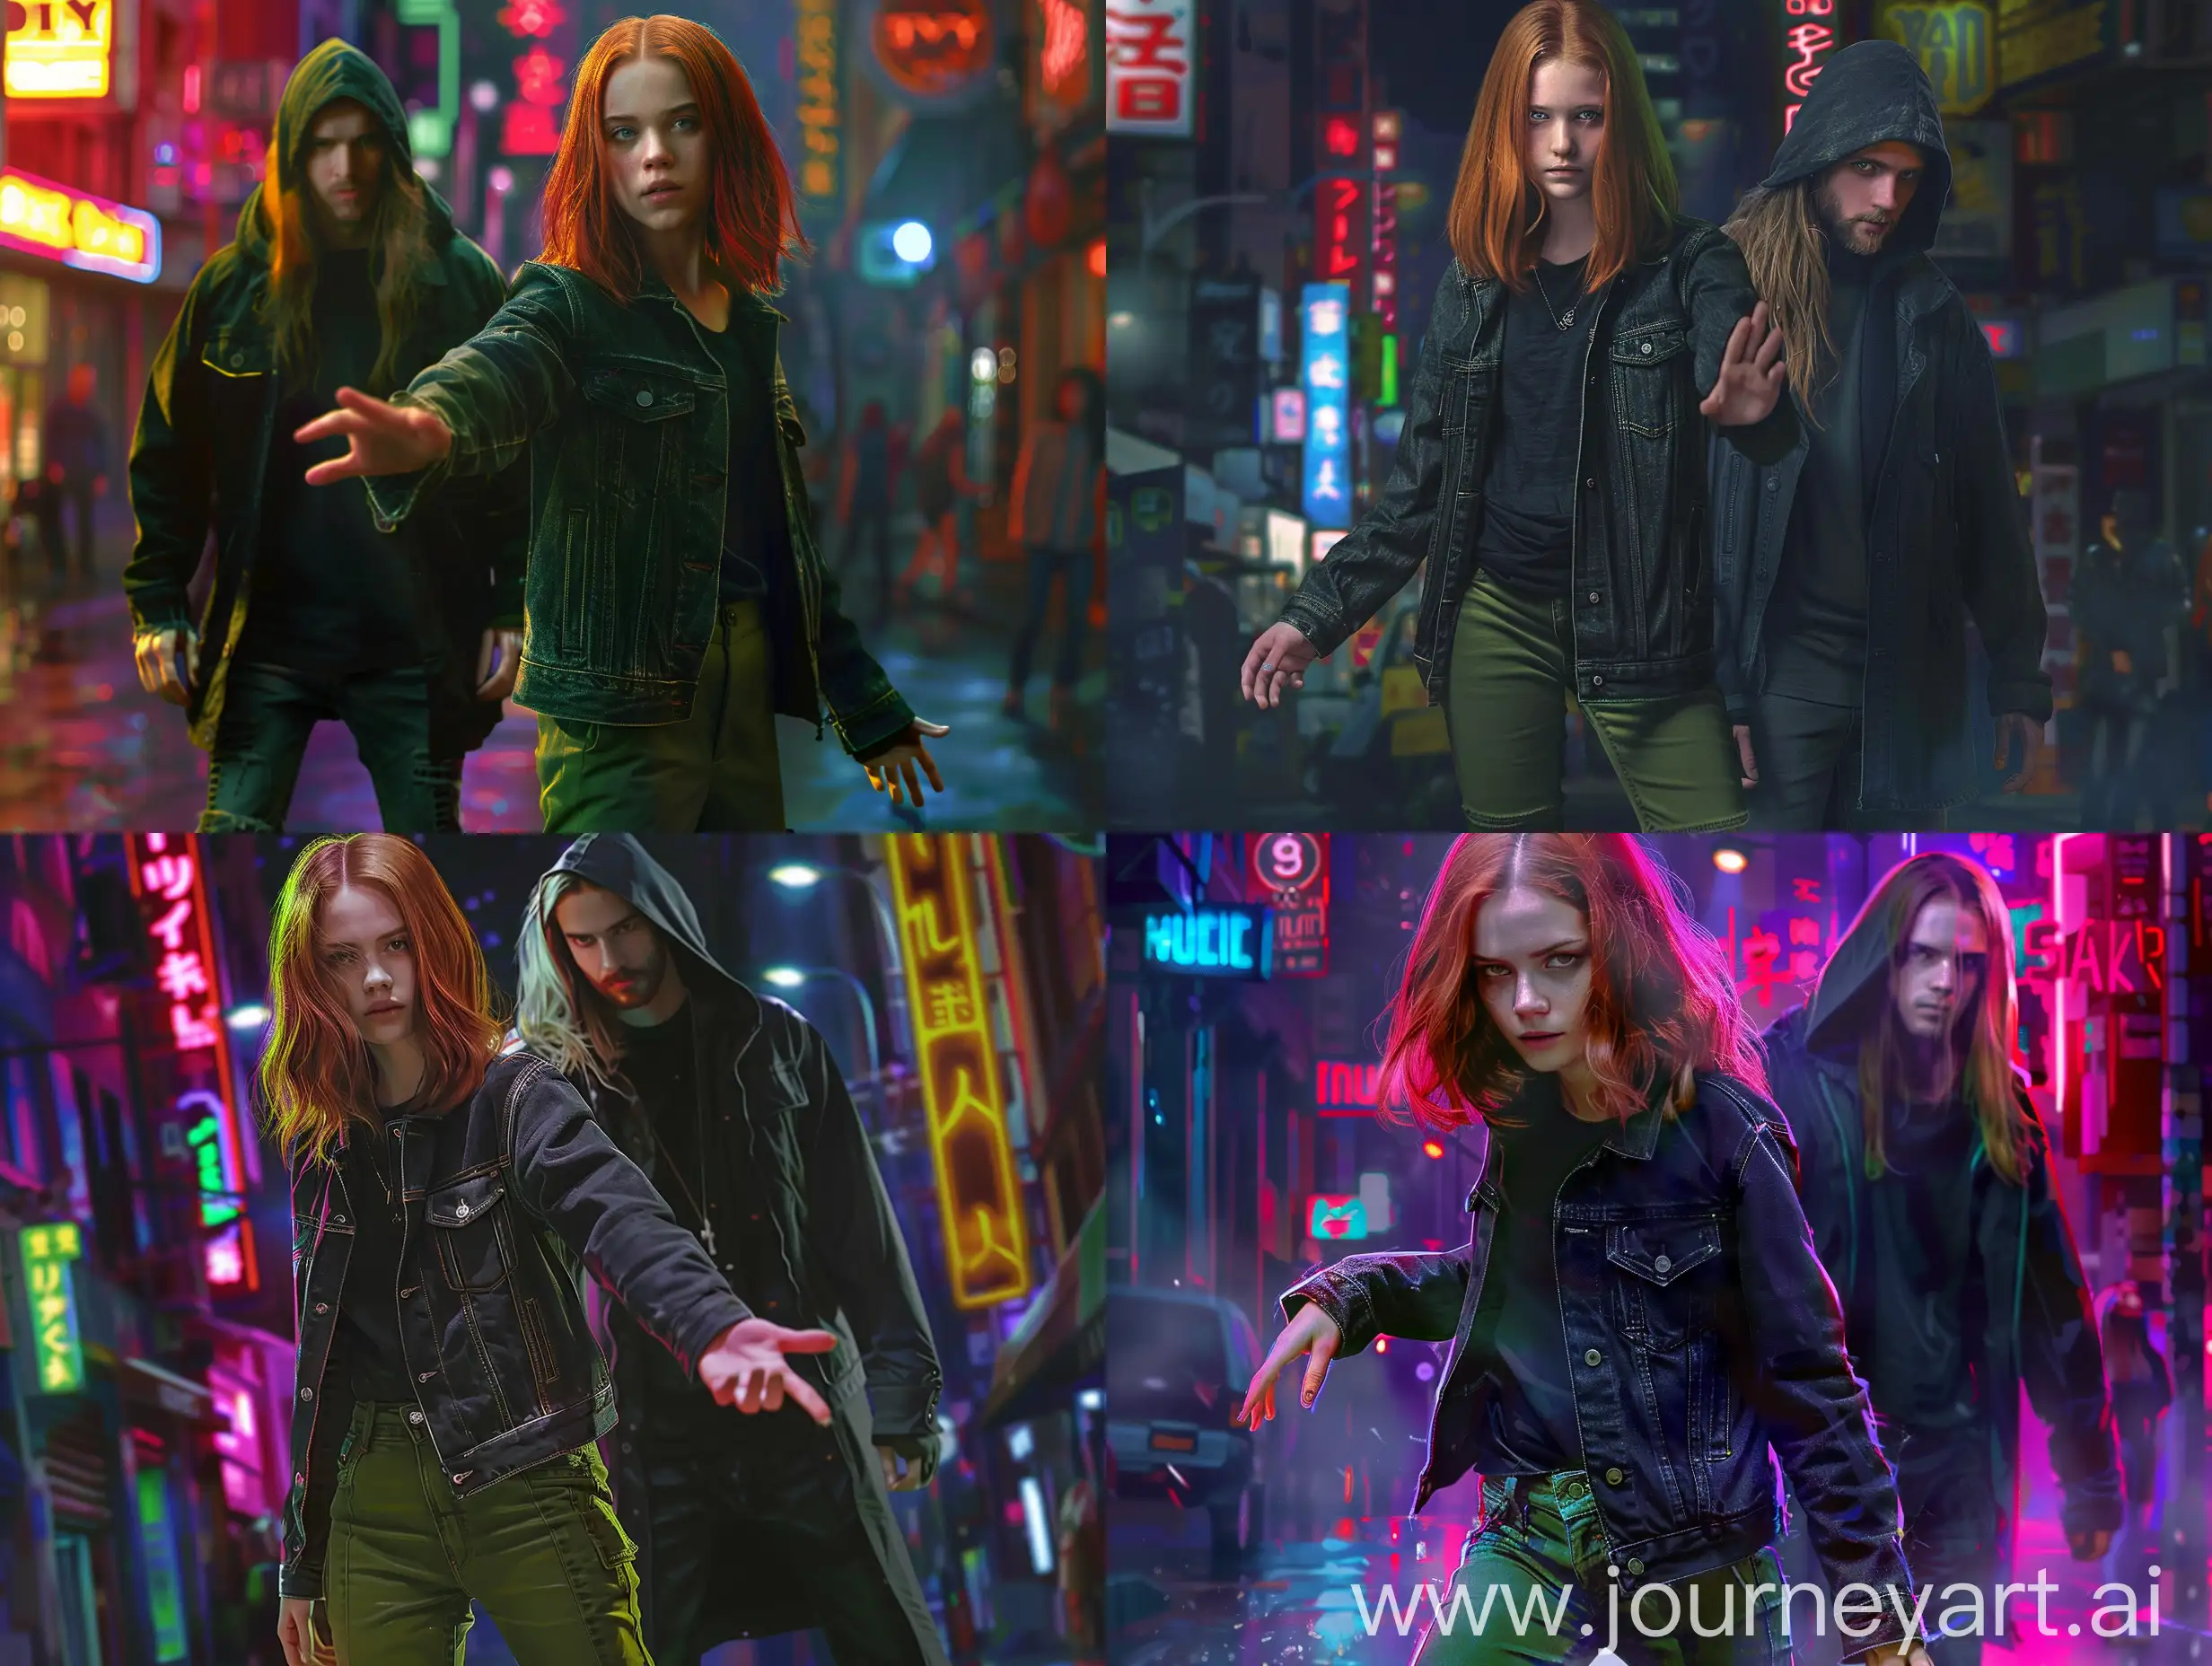 Serious-RedHaired-Girl-and-Blond-Guy-in-Night-Neon-City